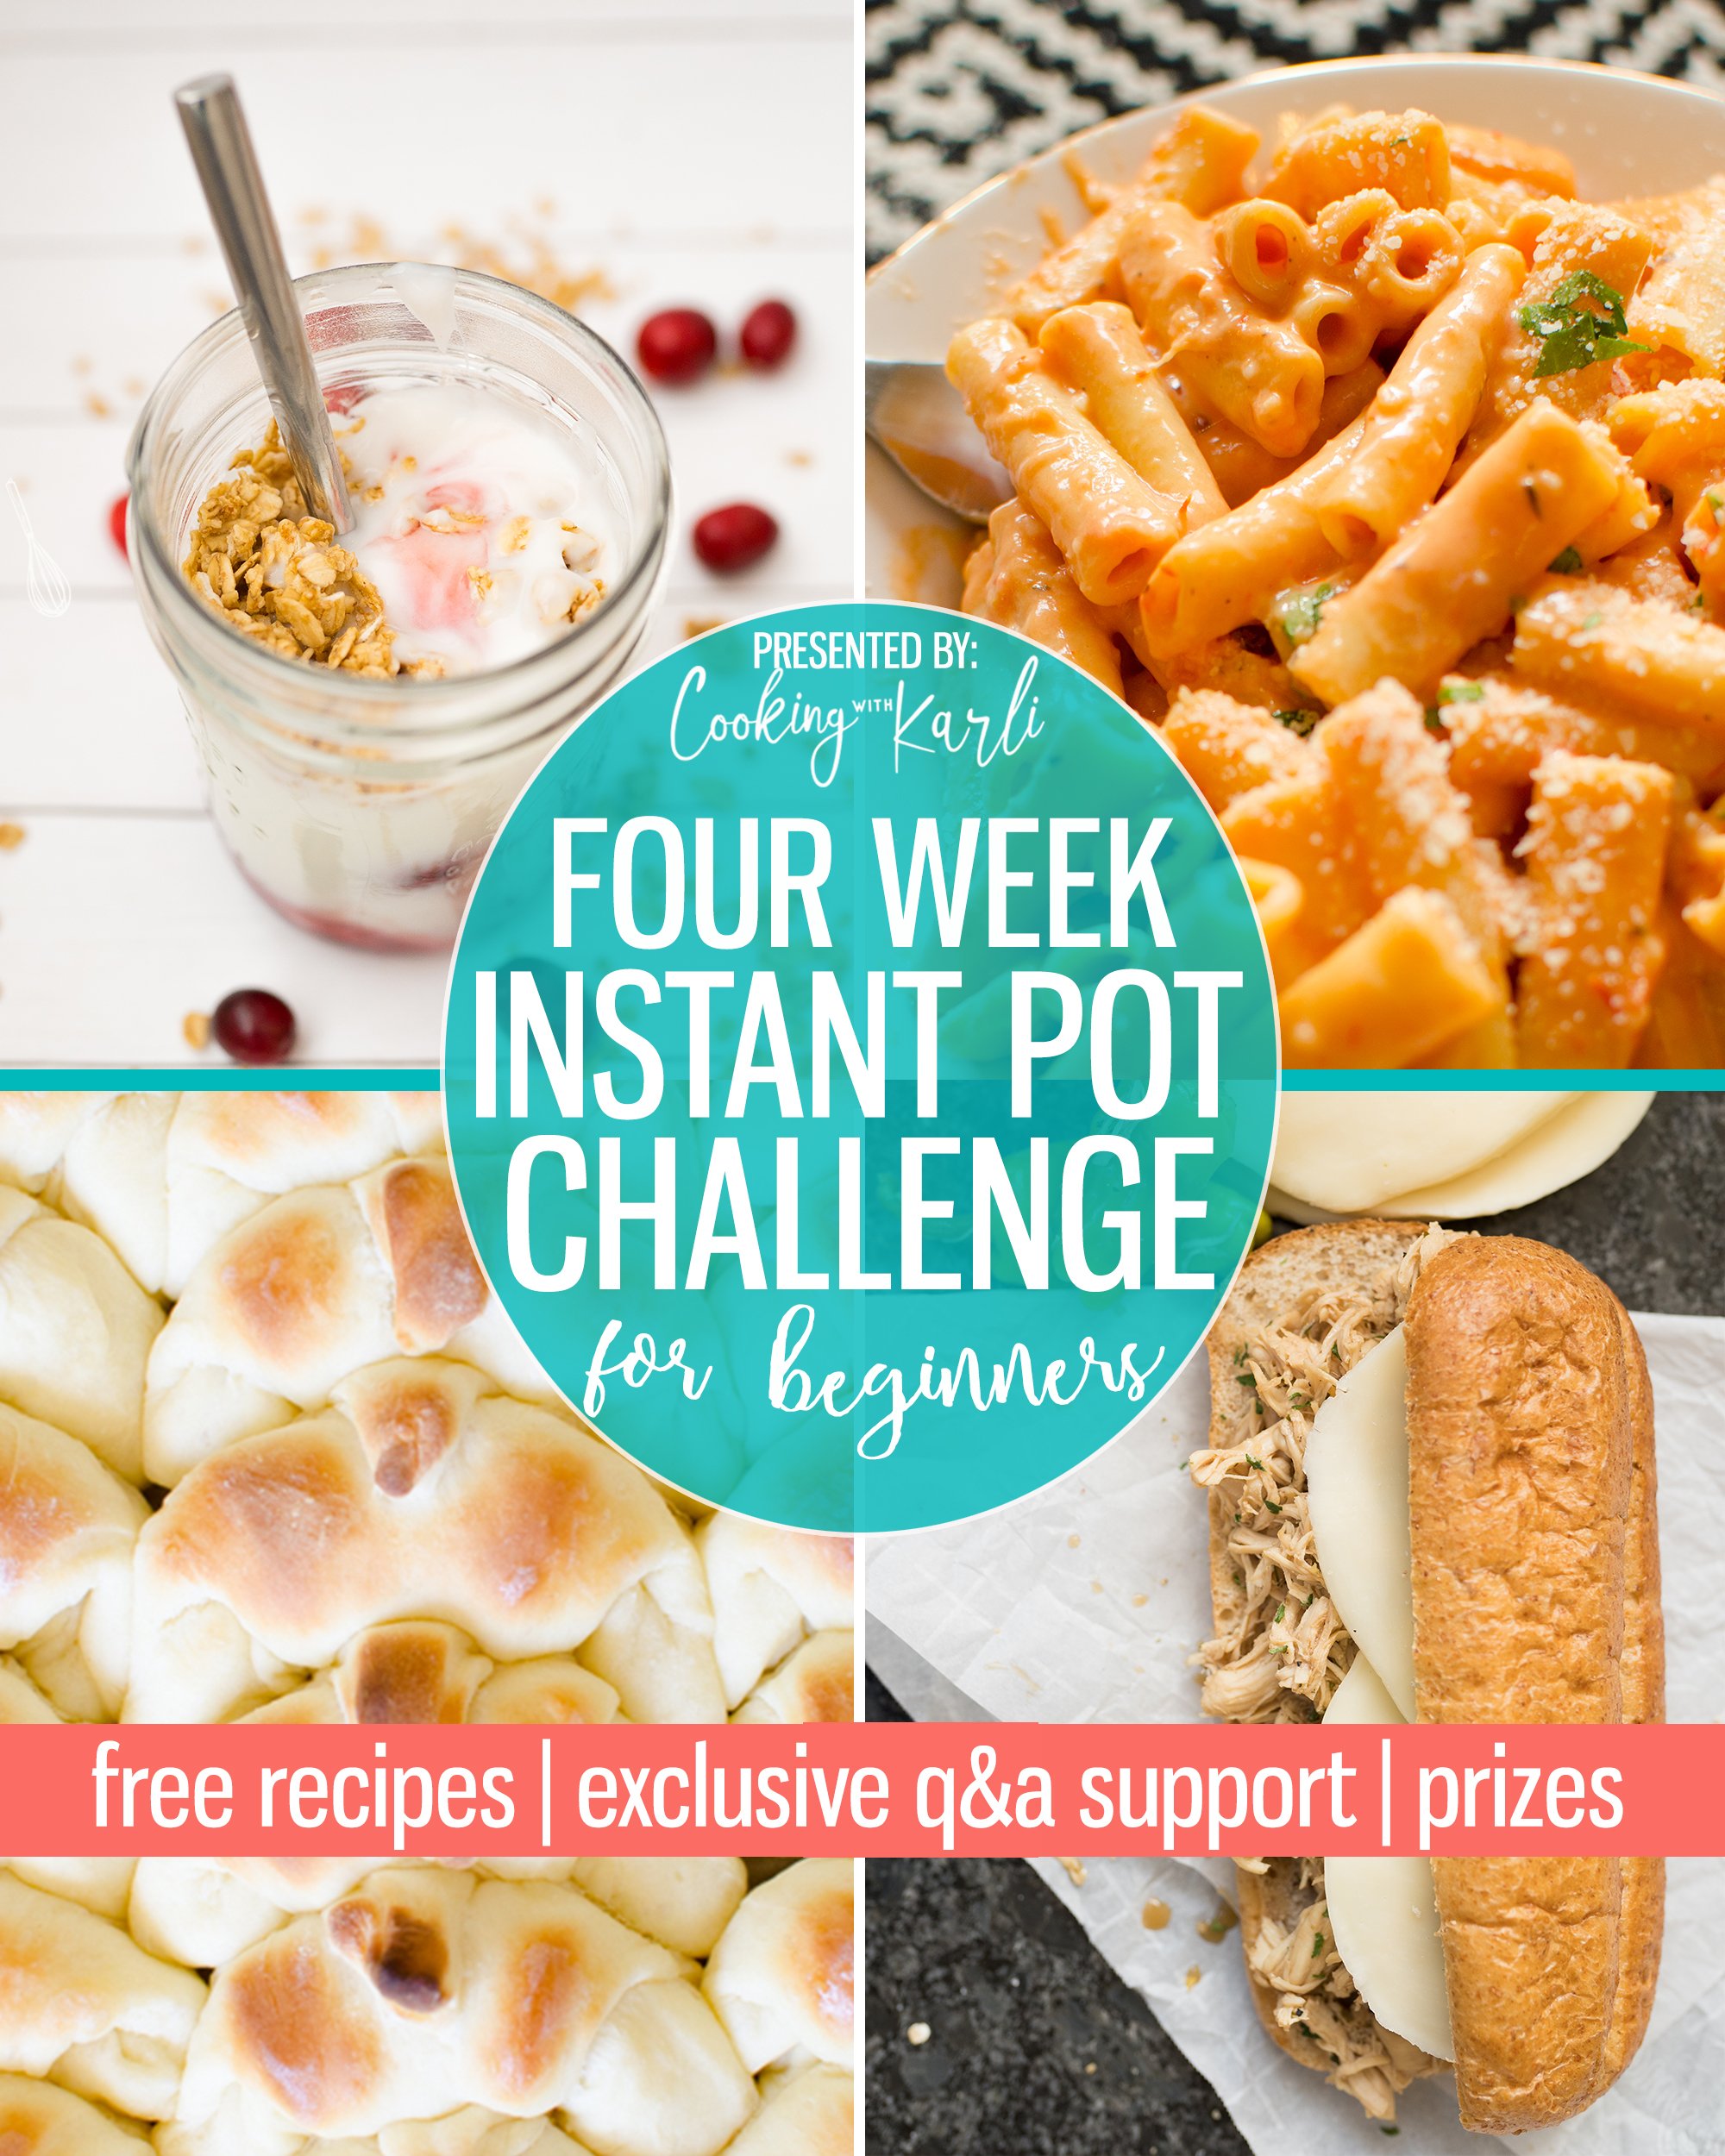 Are you, or someone you know, a little confused by the whole Instant Pot thing? QR & NPR say whaaat?! Join my FREE 4 week challenge and you'll leave feeling like an Instant Pot pro. ? Free recipes, exclusive facebook group, shopping lists.. and.. PRIZES!! |Cooking with Karli| #instantpot #instantpotrecipe #instantpotbeginner #beginner 